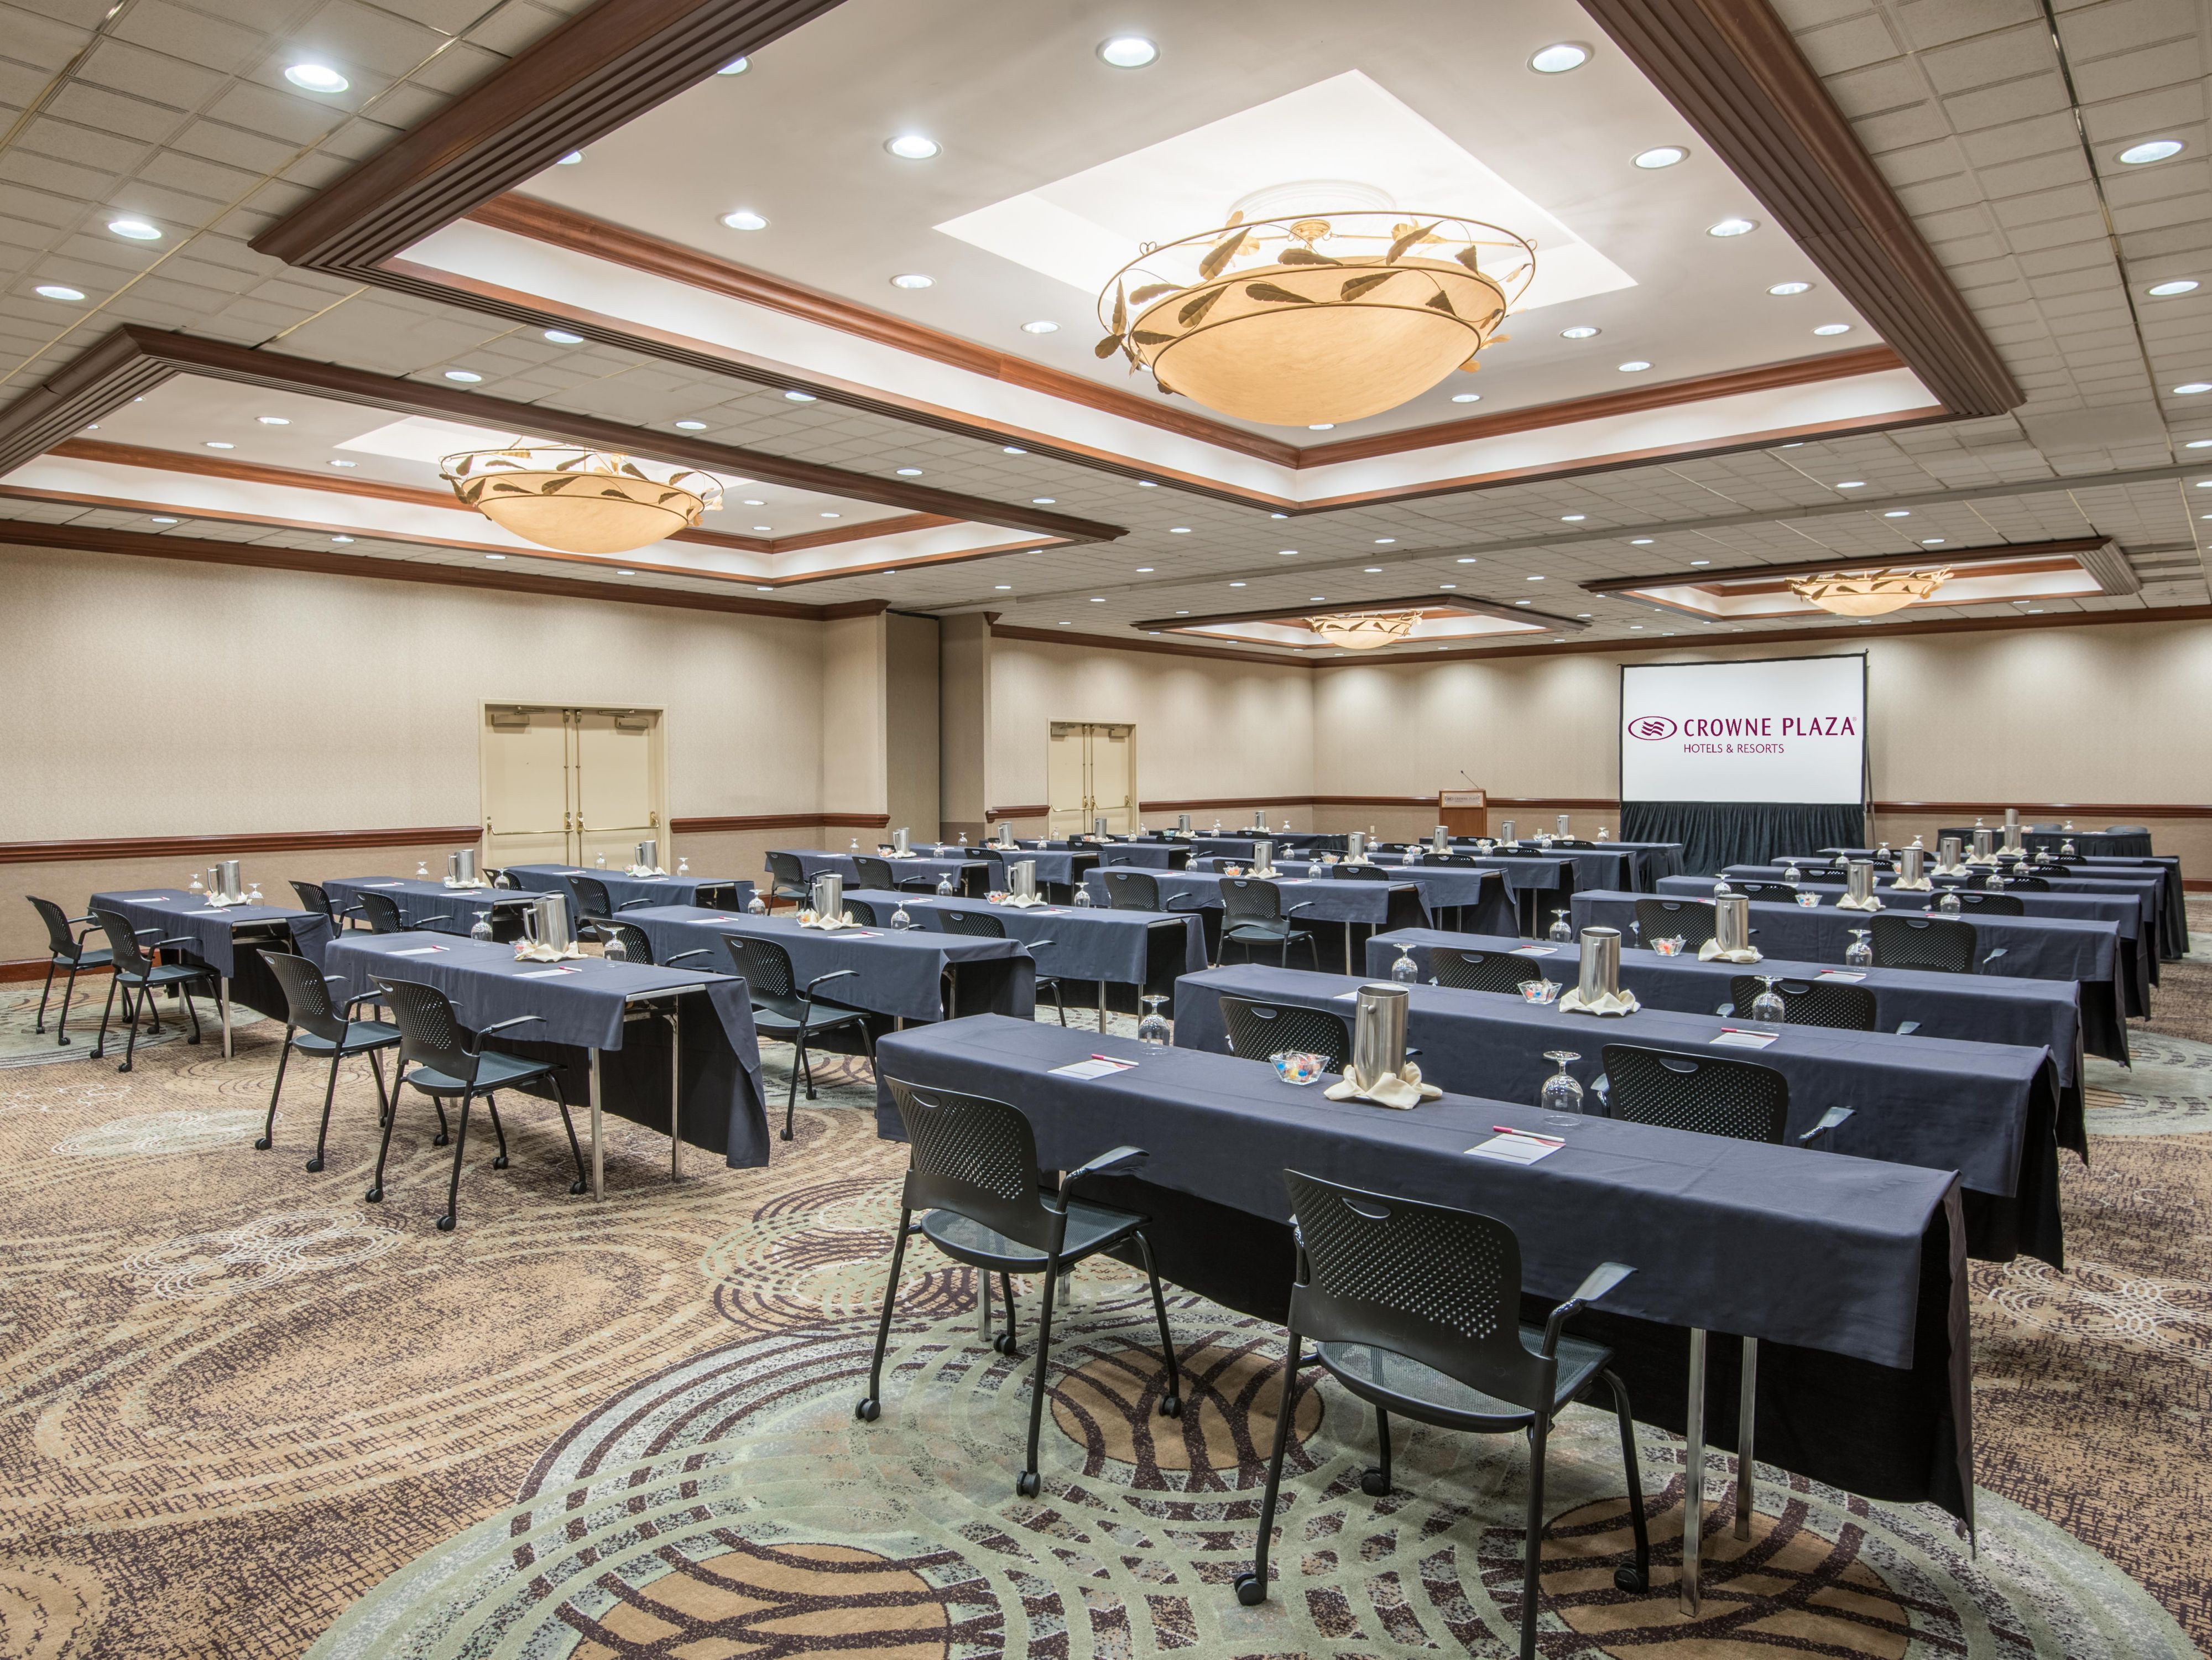 From business presentations to conferences to galas, you can host your next  event in Knoxville at our hotel. With over 15,000 square feet and nine flexible meeting rooms, featuring state-of-the-art audio and visual technology. Our hotel's Meetings Director will help you plan the perfect event for your guests.
